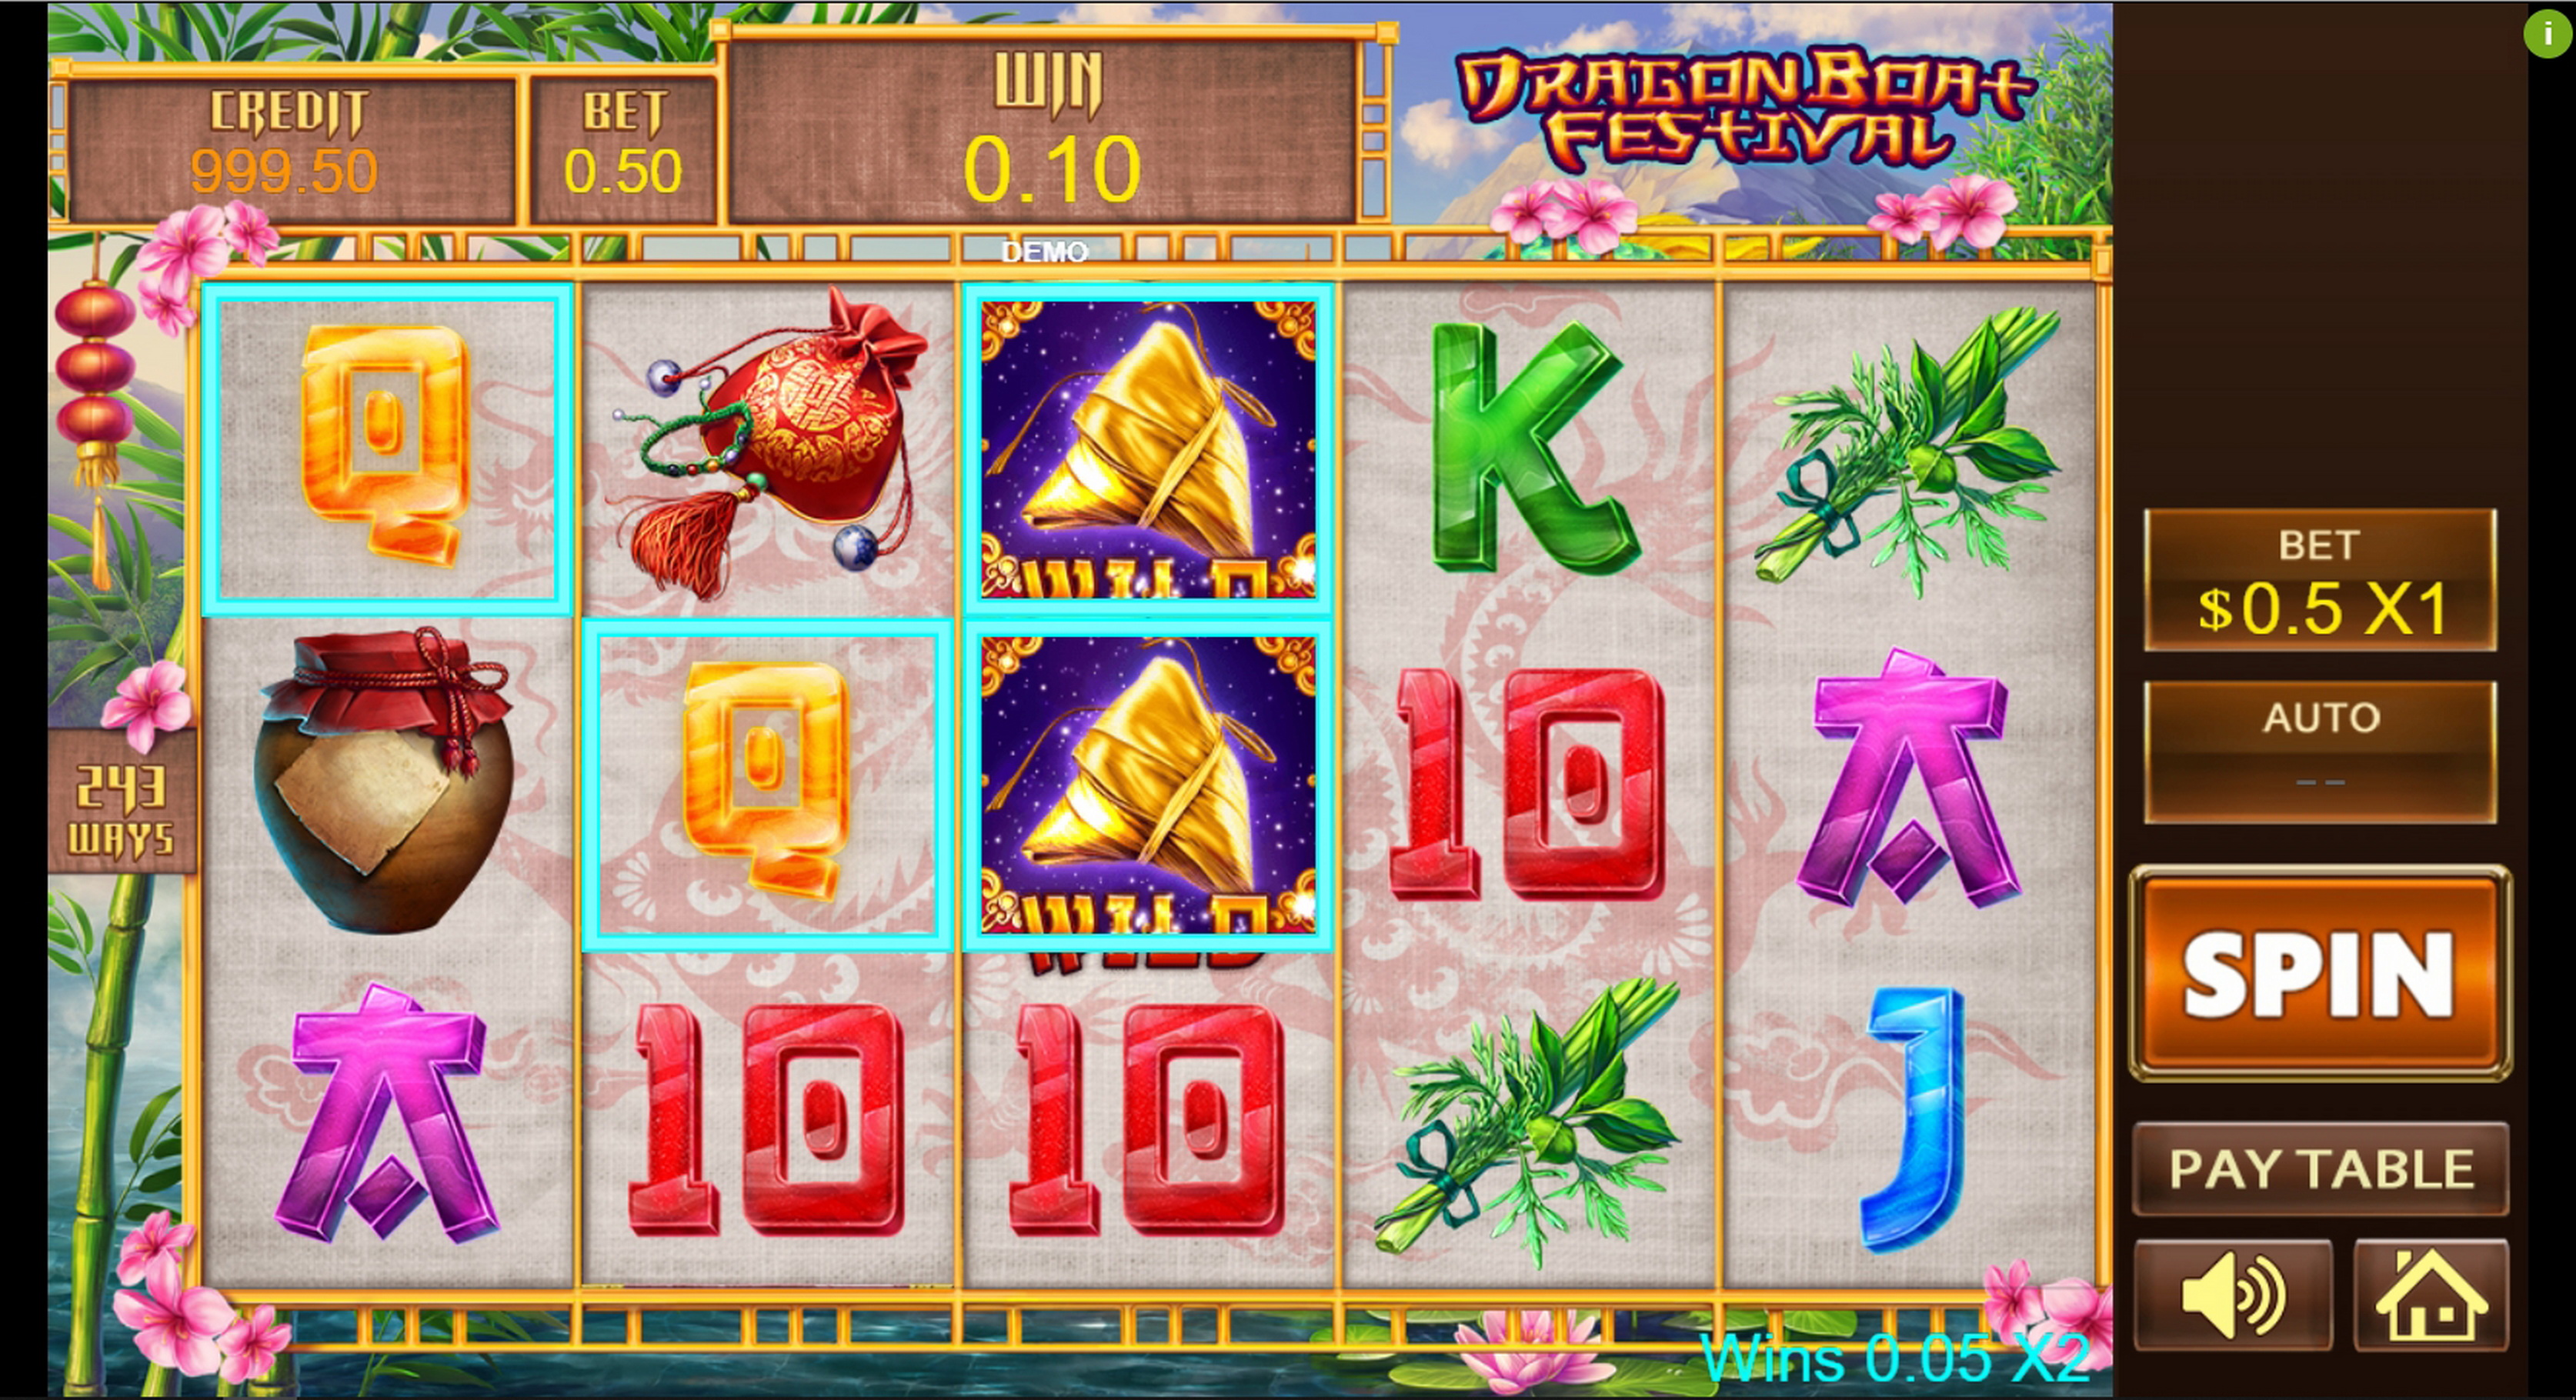 Win Money in Dragon Boat Festival Free Slot Game by PlayStar